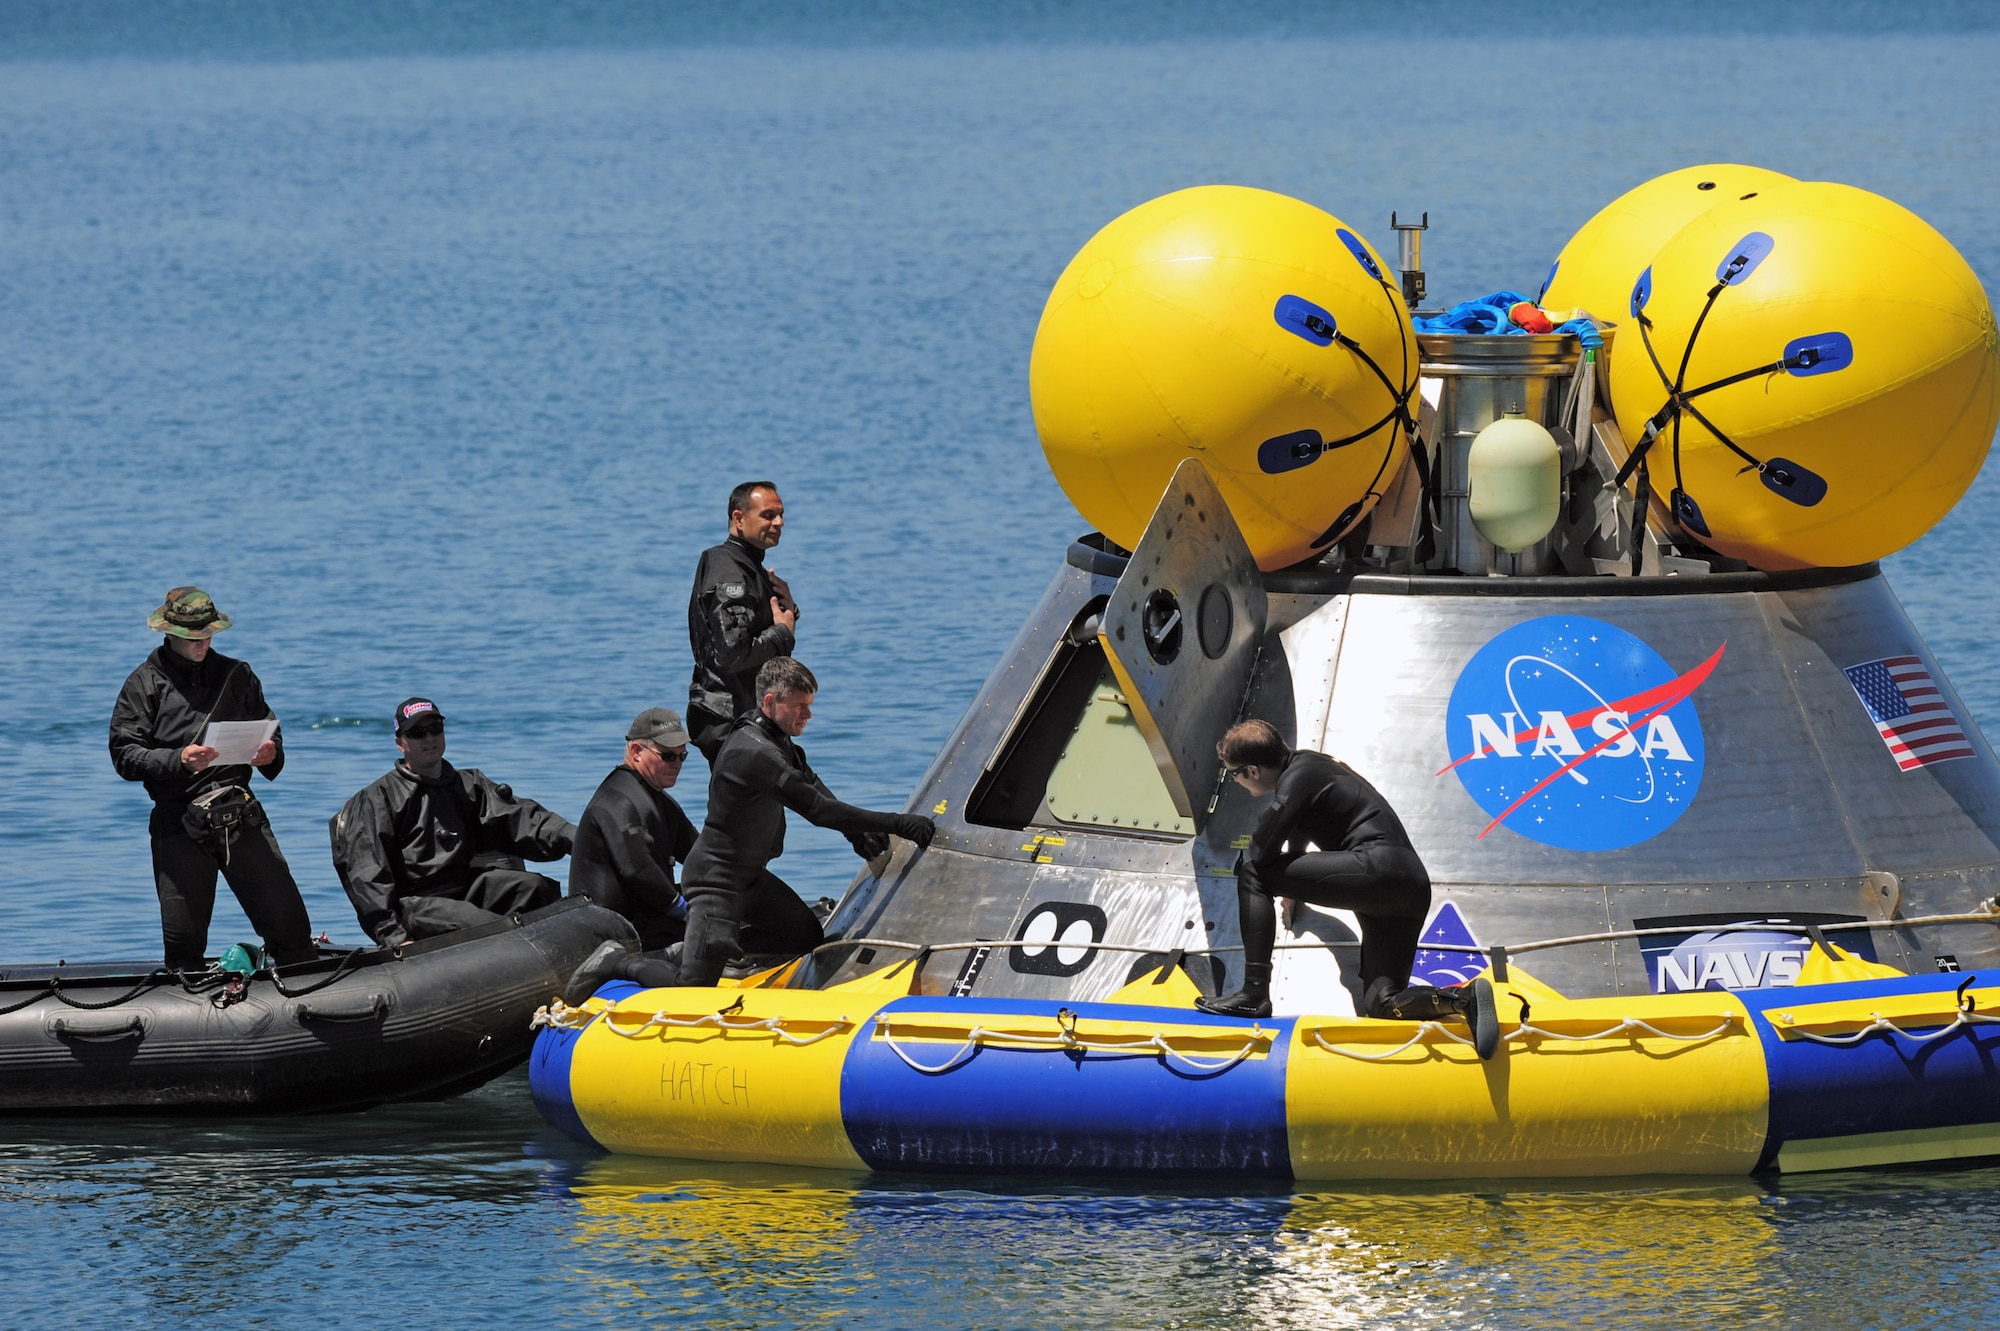 Pararescuemen test the hatch mechanism during recovery testing on a mockup of the Orion crew exploration vehicle March 8 at the Trident Basin at Port Canaveral, Fla. The team also tested an inflatable flotation collar (the blue and yellow ring seen around the base of the capsule), which is designed both to stabilize the capsule after water landing and provide a platform for recovery personnel to stand on during the operation. Reservists from the Air Force Reserve's 920th Rescue Wingprovide contingency medical and recovery support for all NASA shuttle launches. (U.S. Air Force photo/Tech. Sgt. Paul Flipse) 